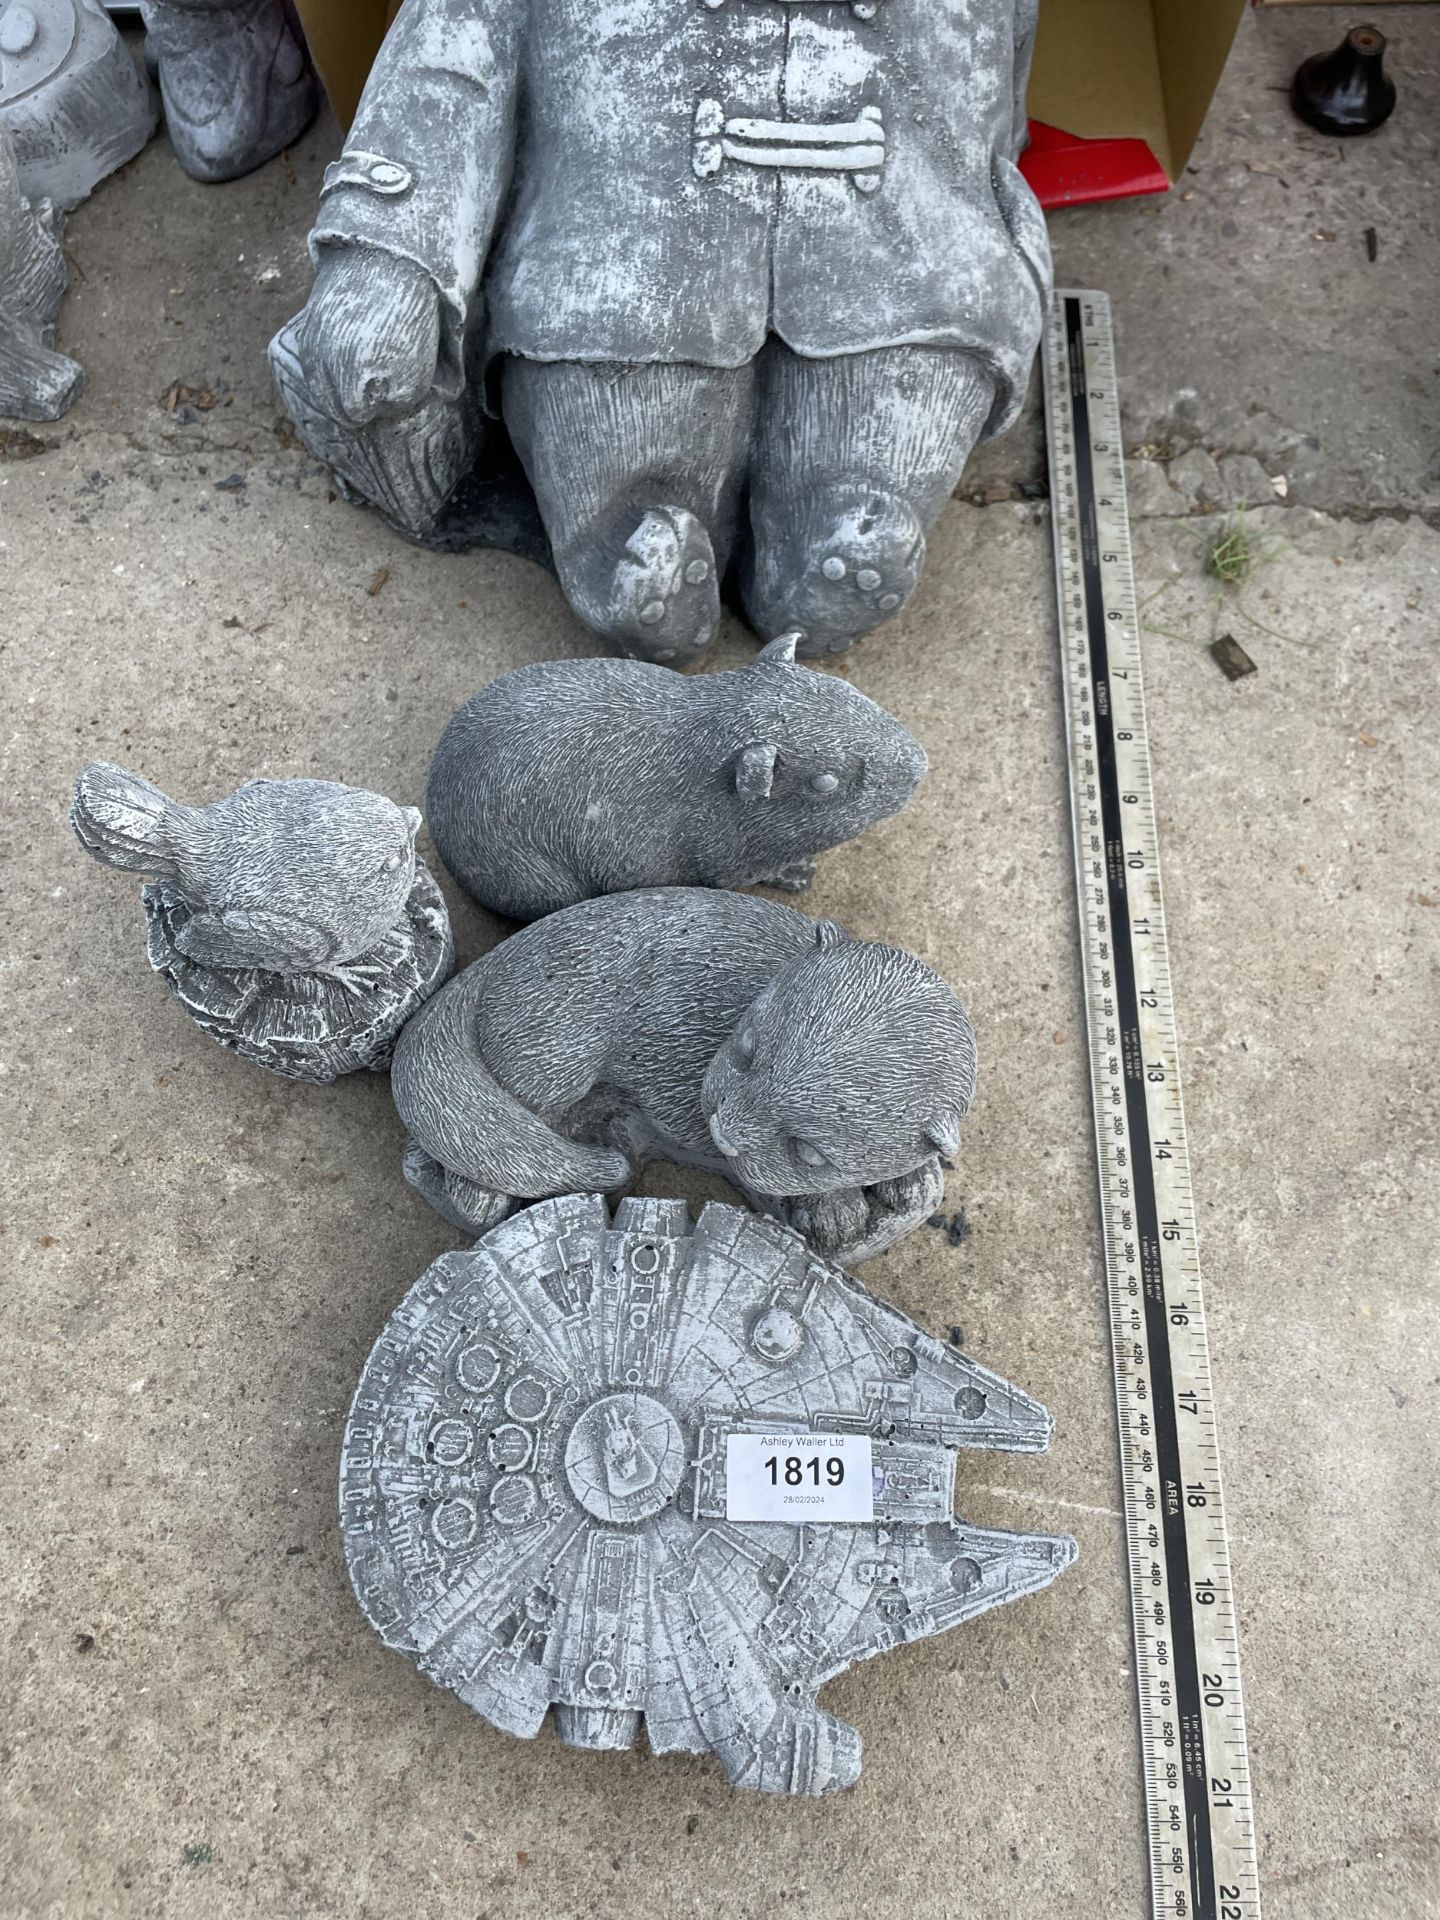 FIVE VARIOUS CONCRETE GARDEN FIGURES TO INCLUDE PADDINGTON BEAR AND AN OTTER ETC - Image 2 of 2